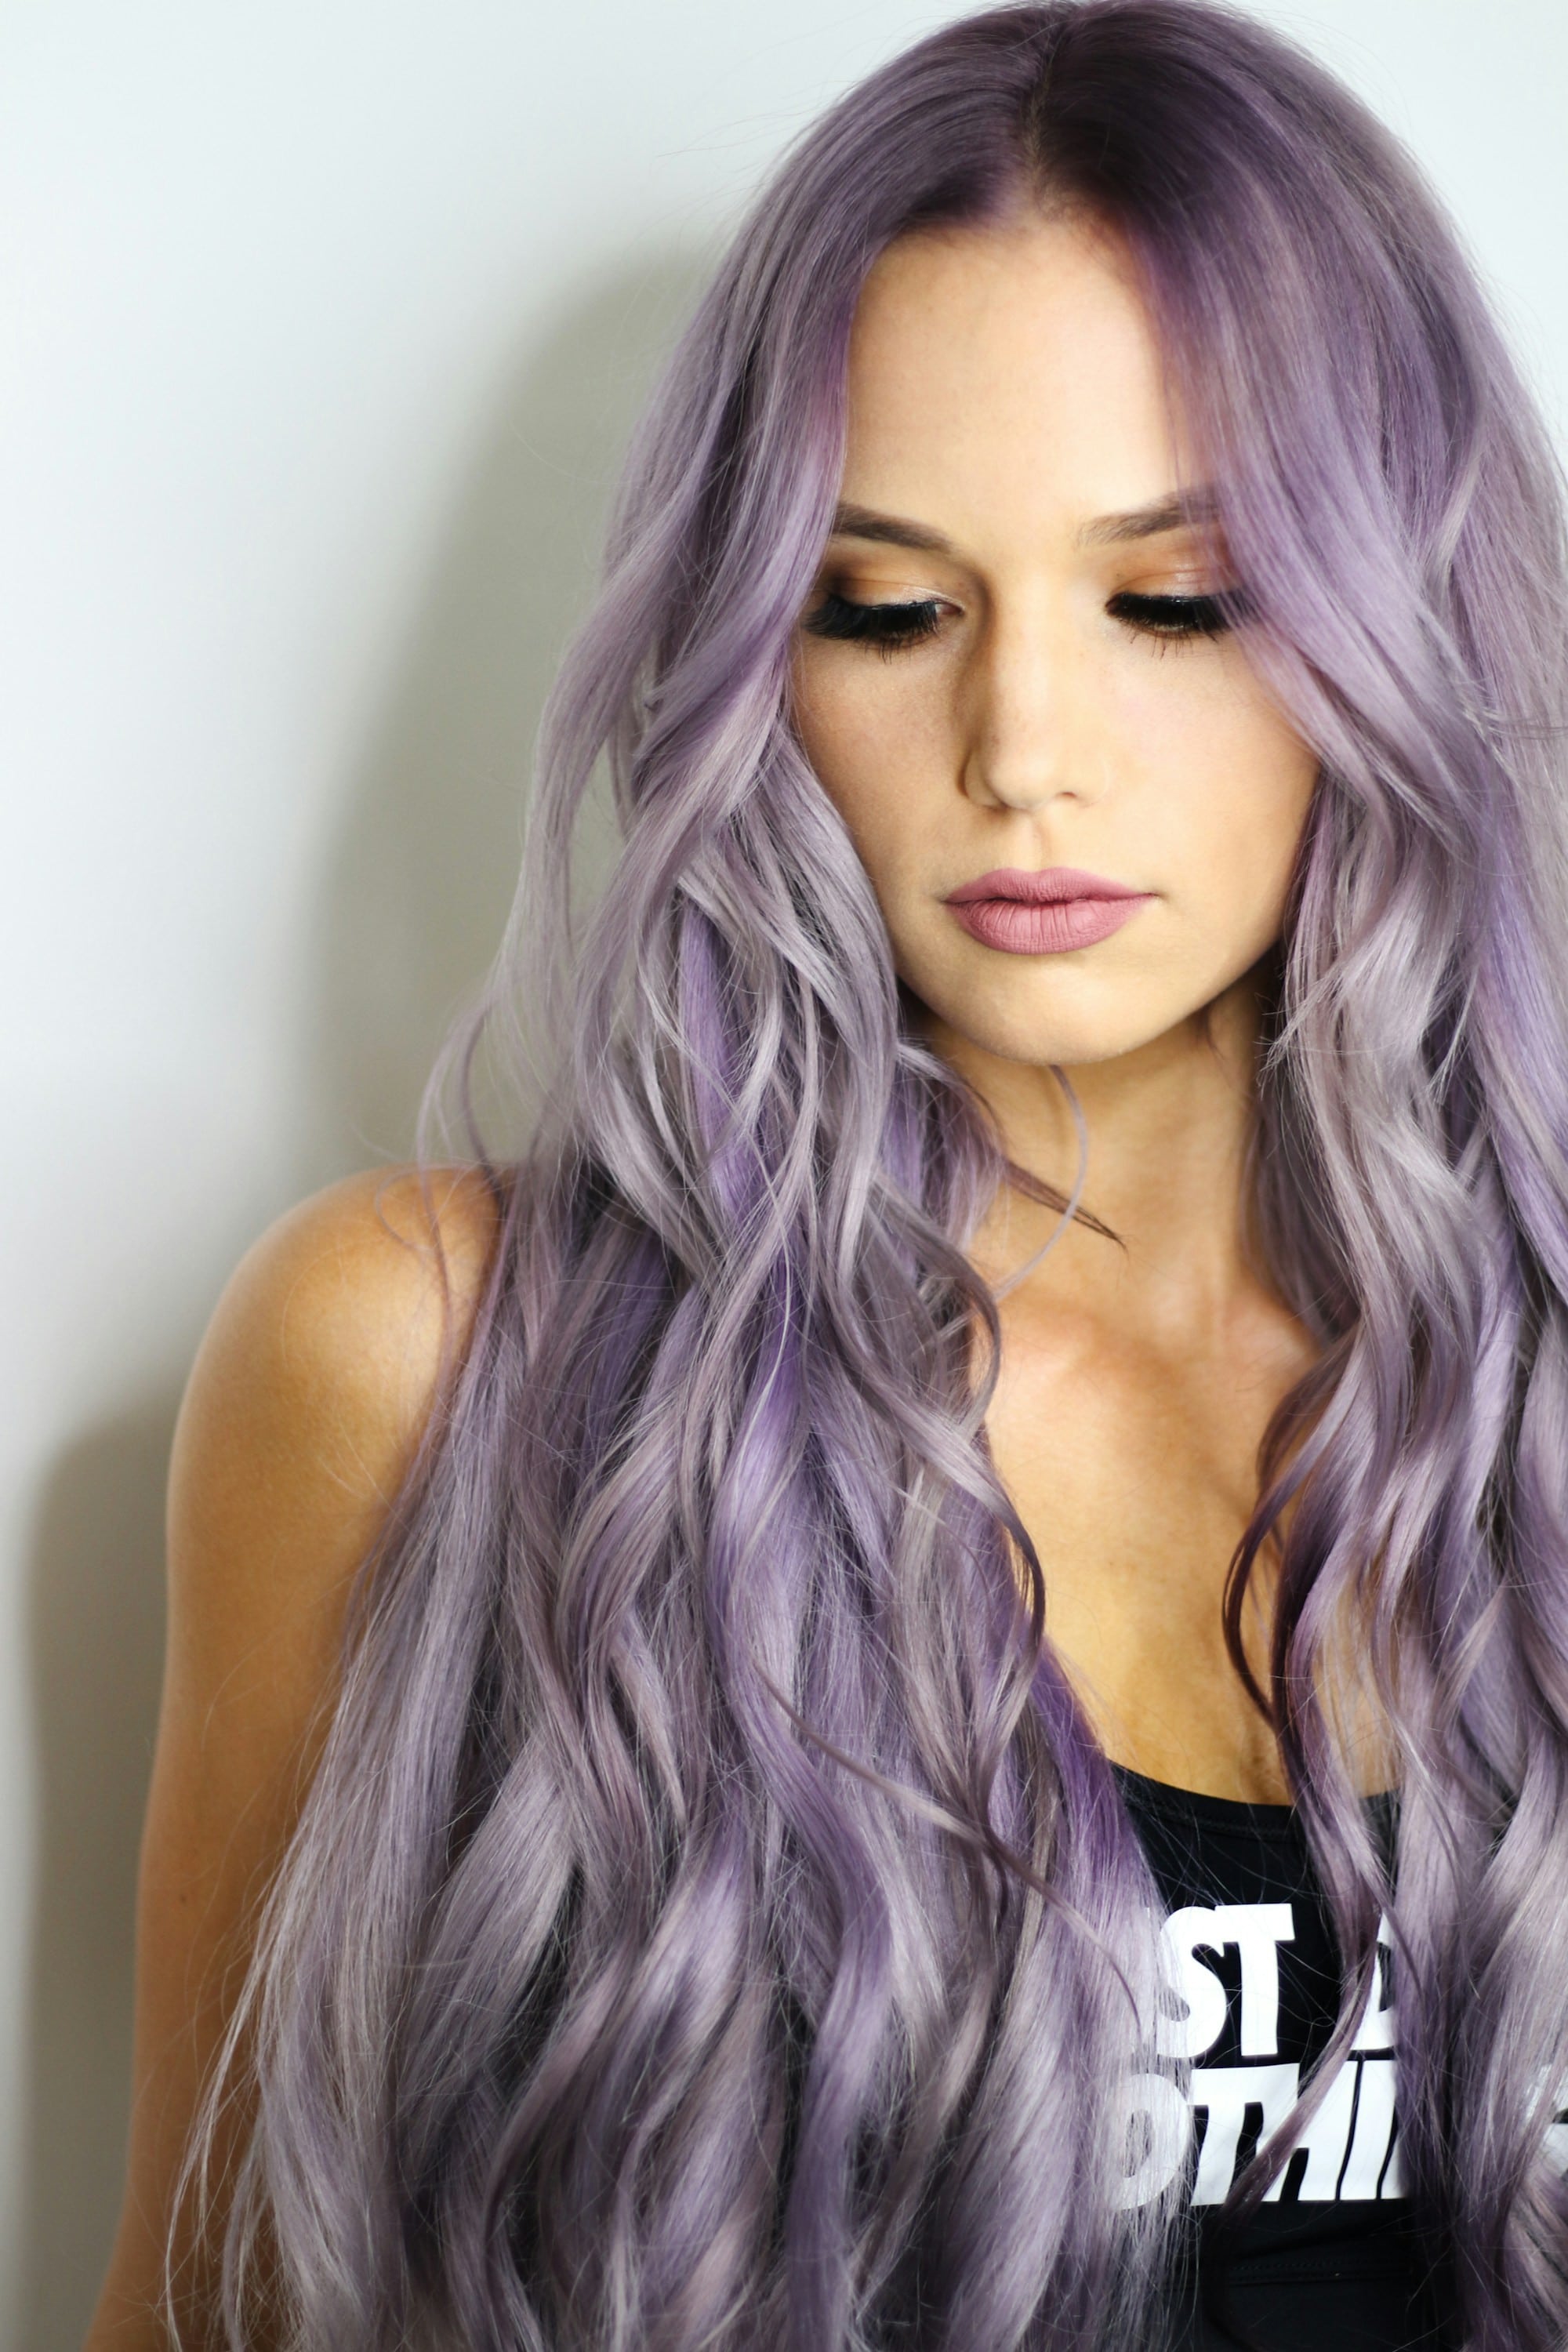 This model has Fantasy Lavendar Hair Color with Silver ends to show that color expression is up to you. All Fantasy colors can be done here at Hair 4 Everyone